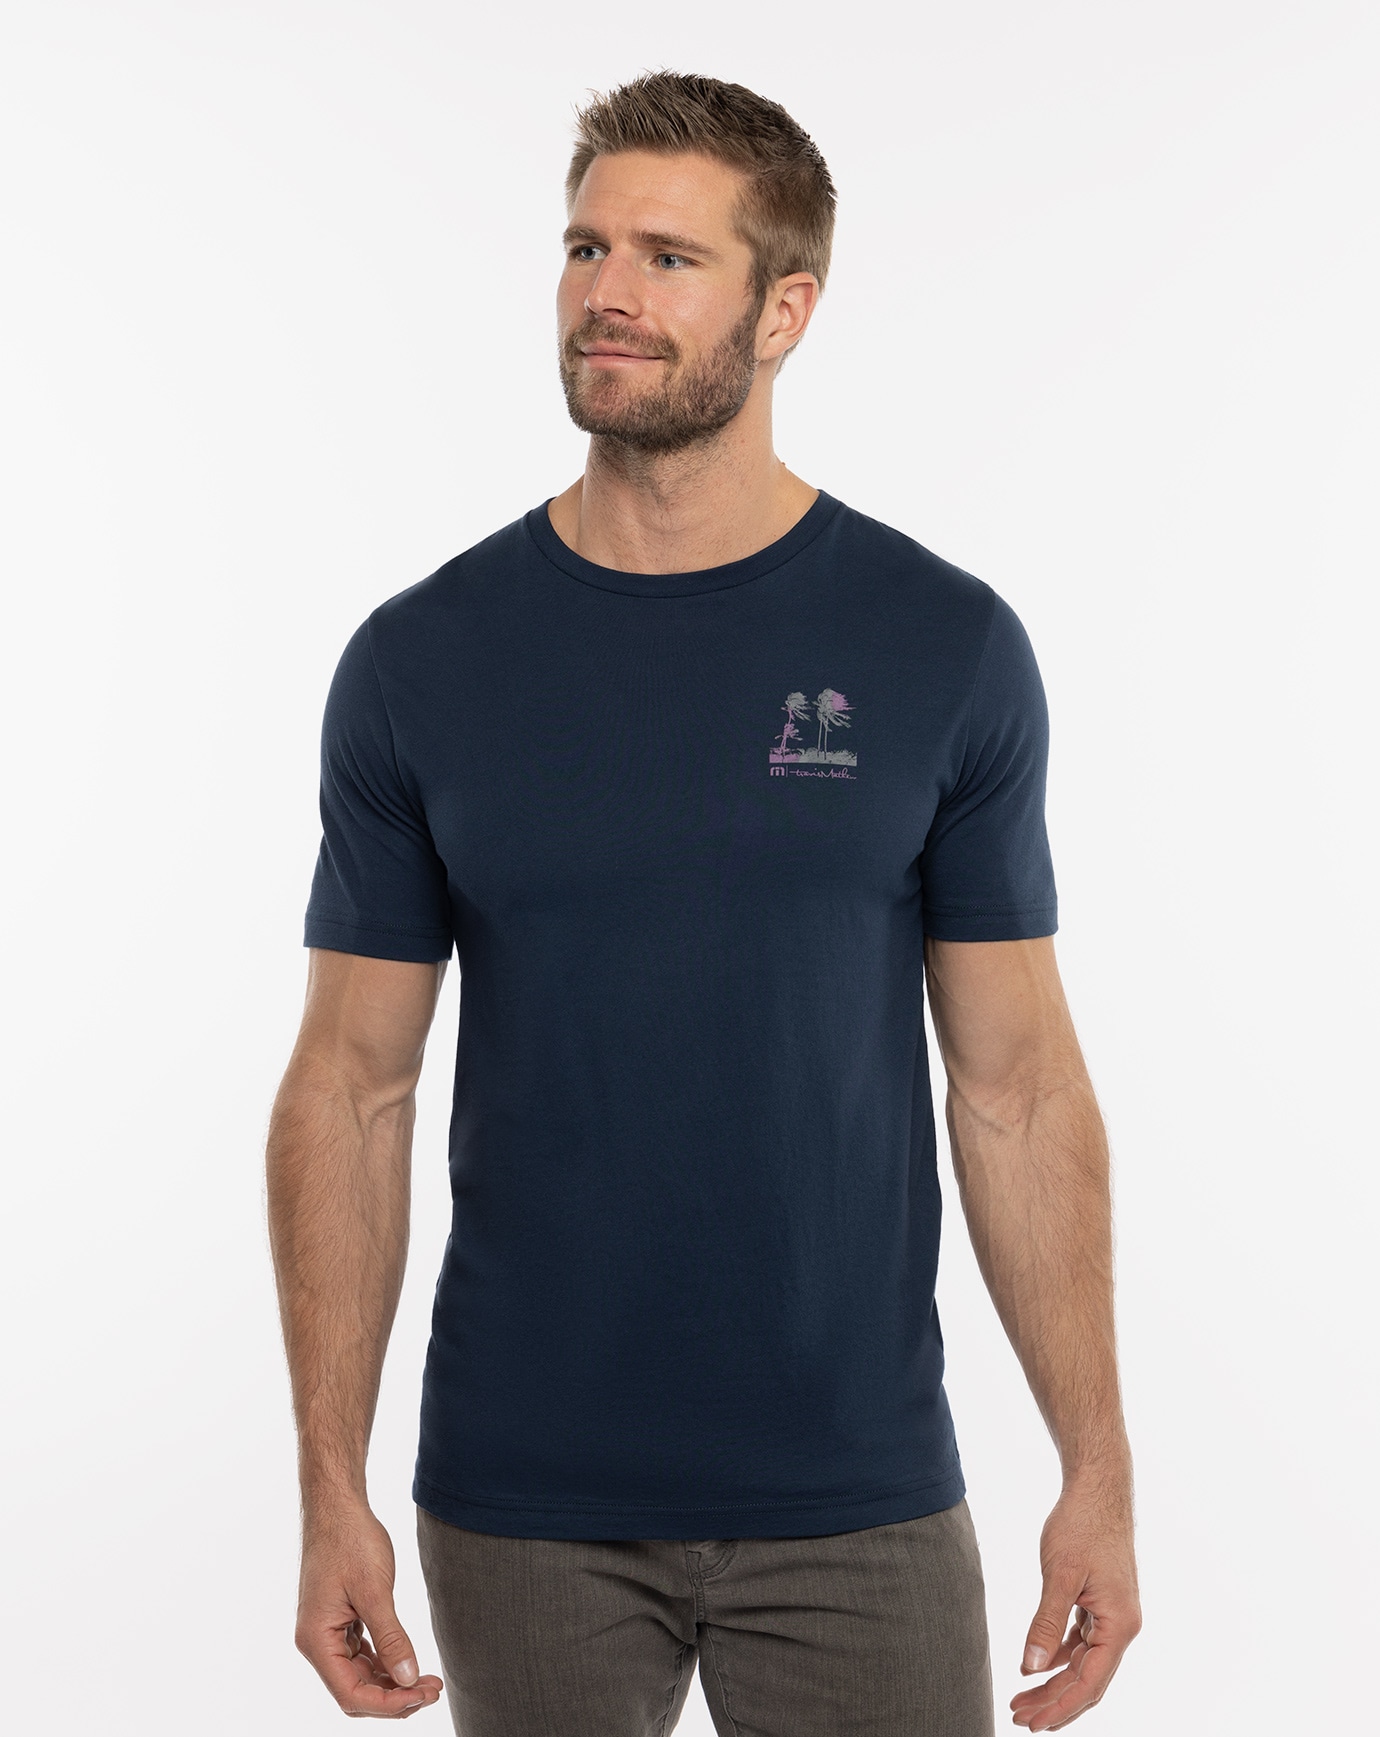 Related Product - PADDLEBOARD TEE